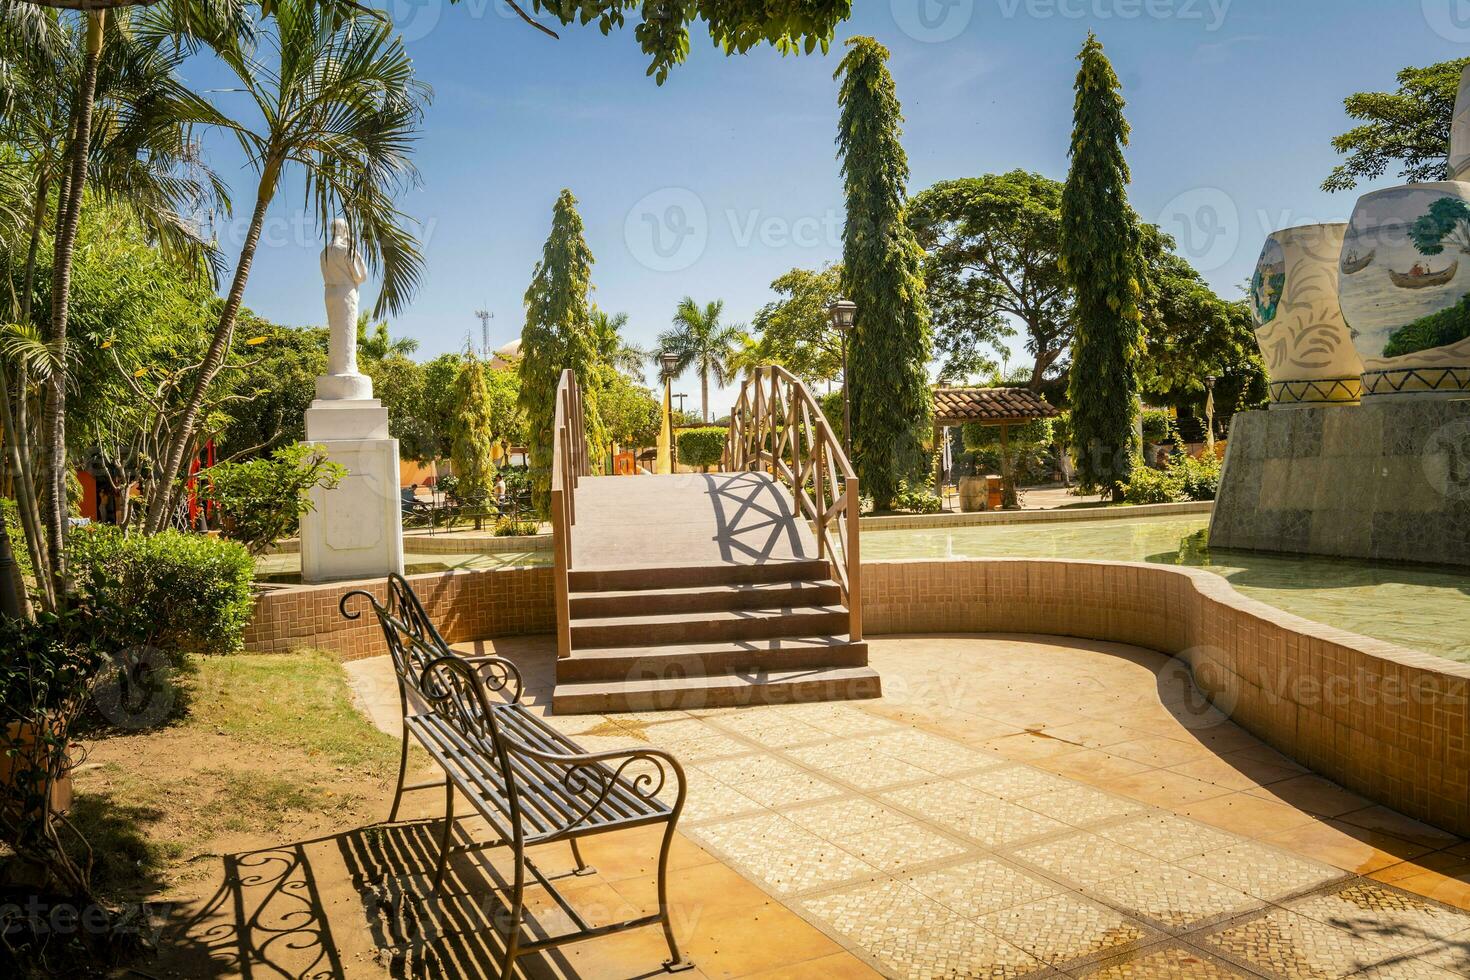 A nice and relaxed park with a wooden bridge over a water fountain, Traditional park of Nagarote, Nicaragua. View of a calm park with a small wooden bridge on a sunny day. Nagarote central park photo